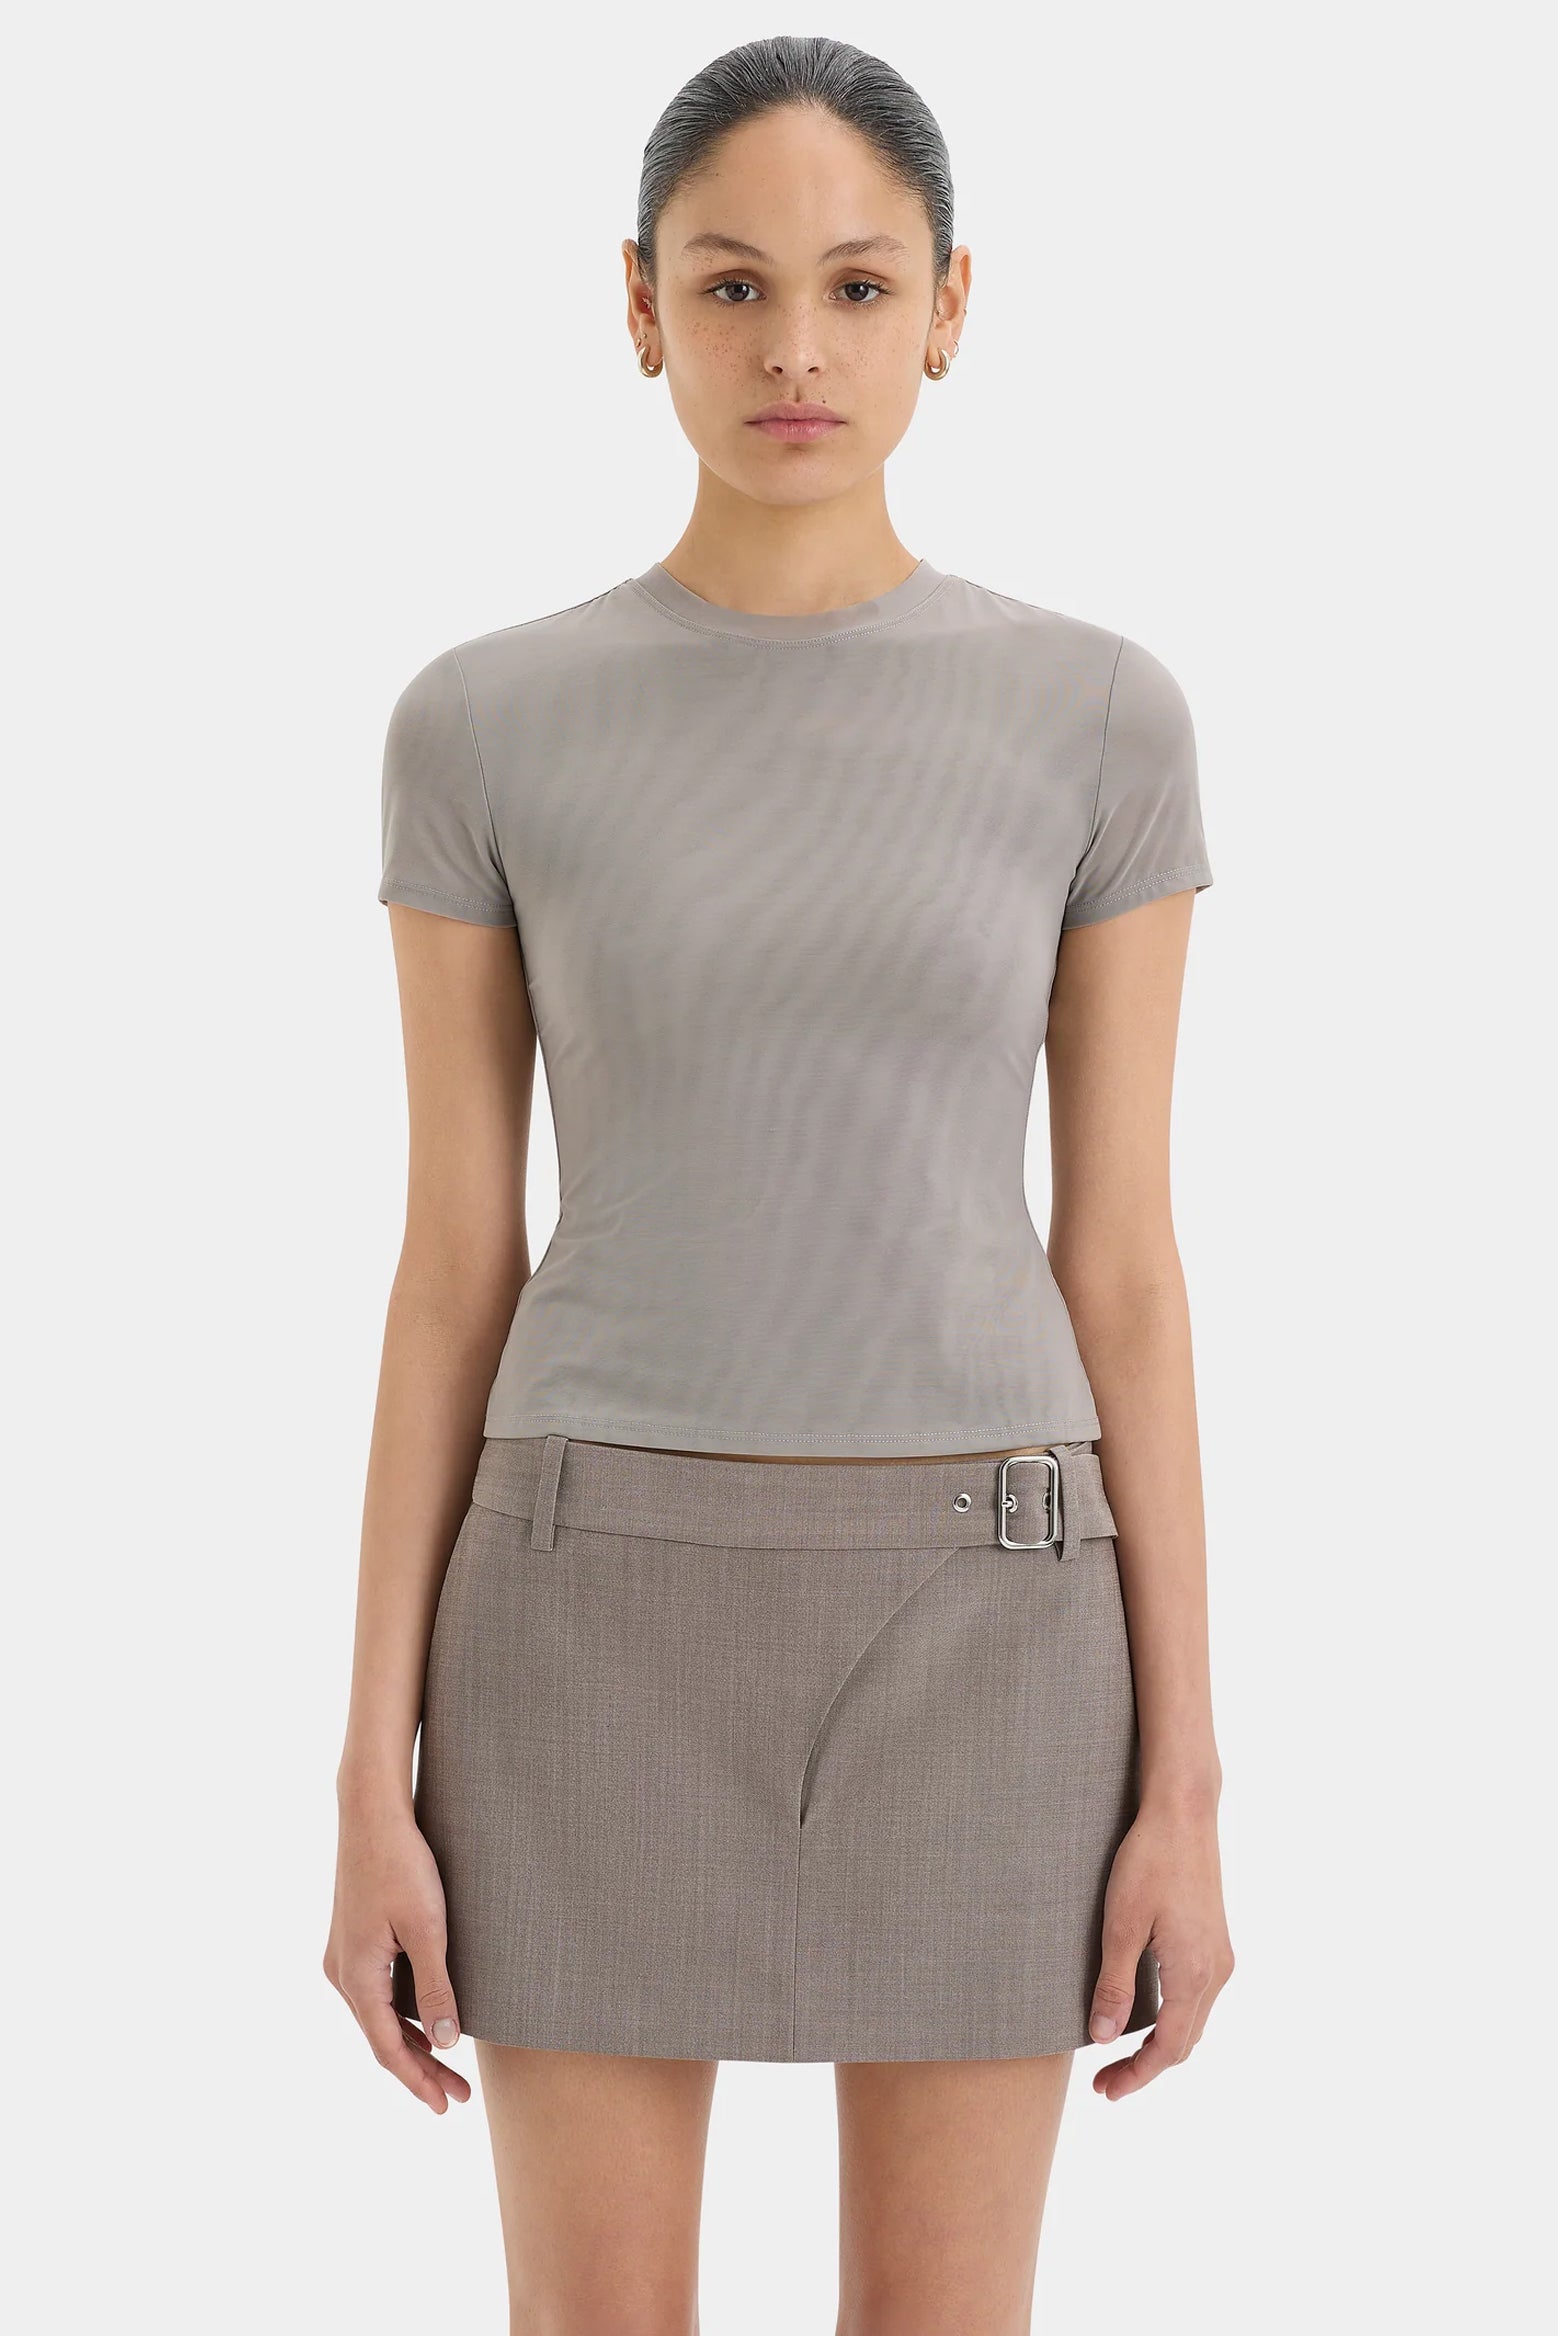 SIR Leonardo Belted Mini Skirt in Taupe available at The New Trend Australia.